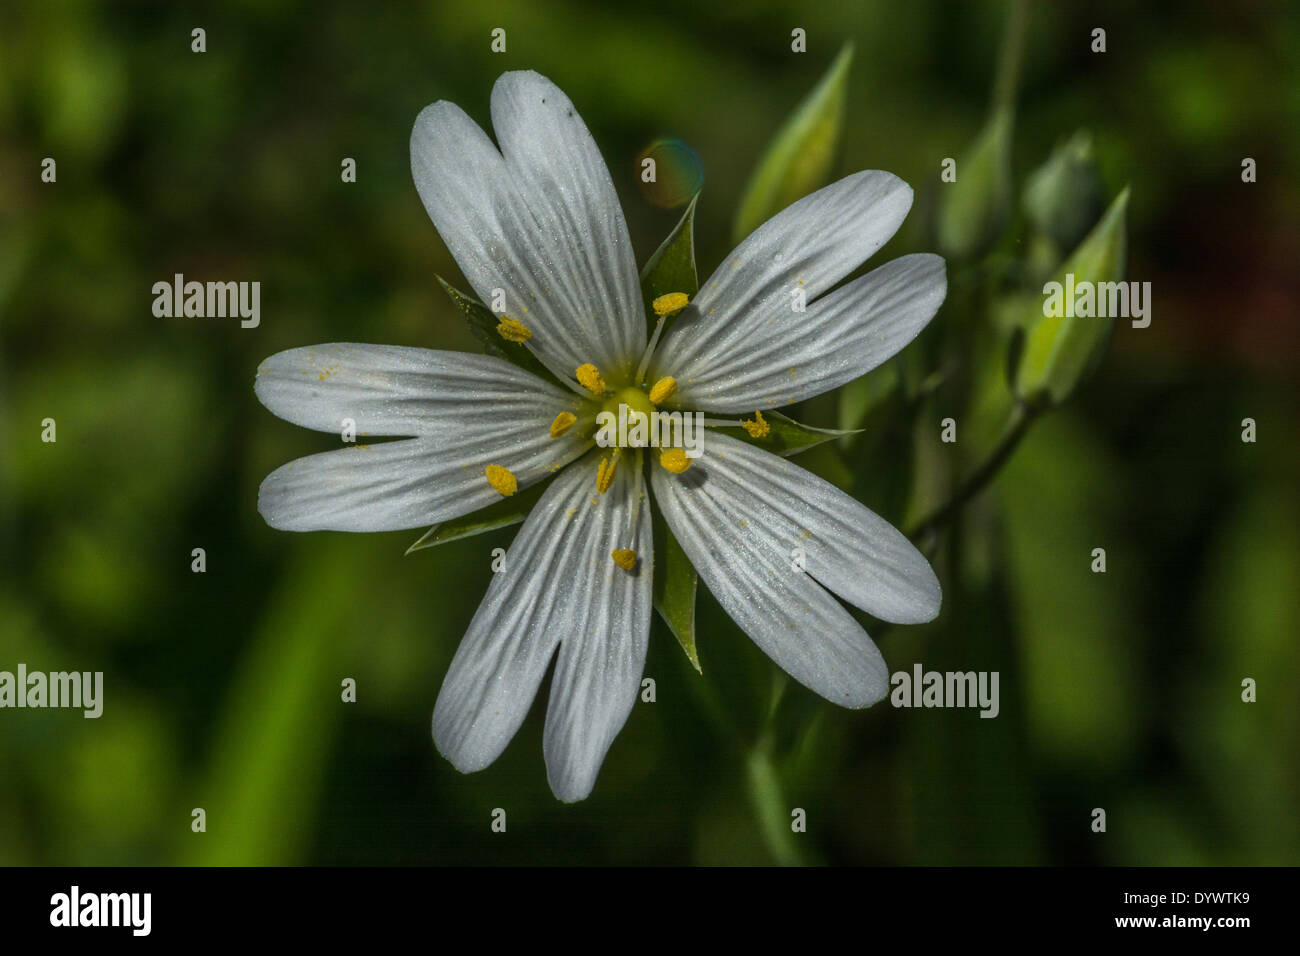 Flower of Greater Stitchwort / Stellaria holostea. Former medicinal plant used in herbal remedies. Stock Photo